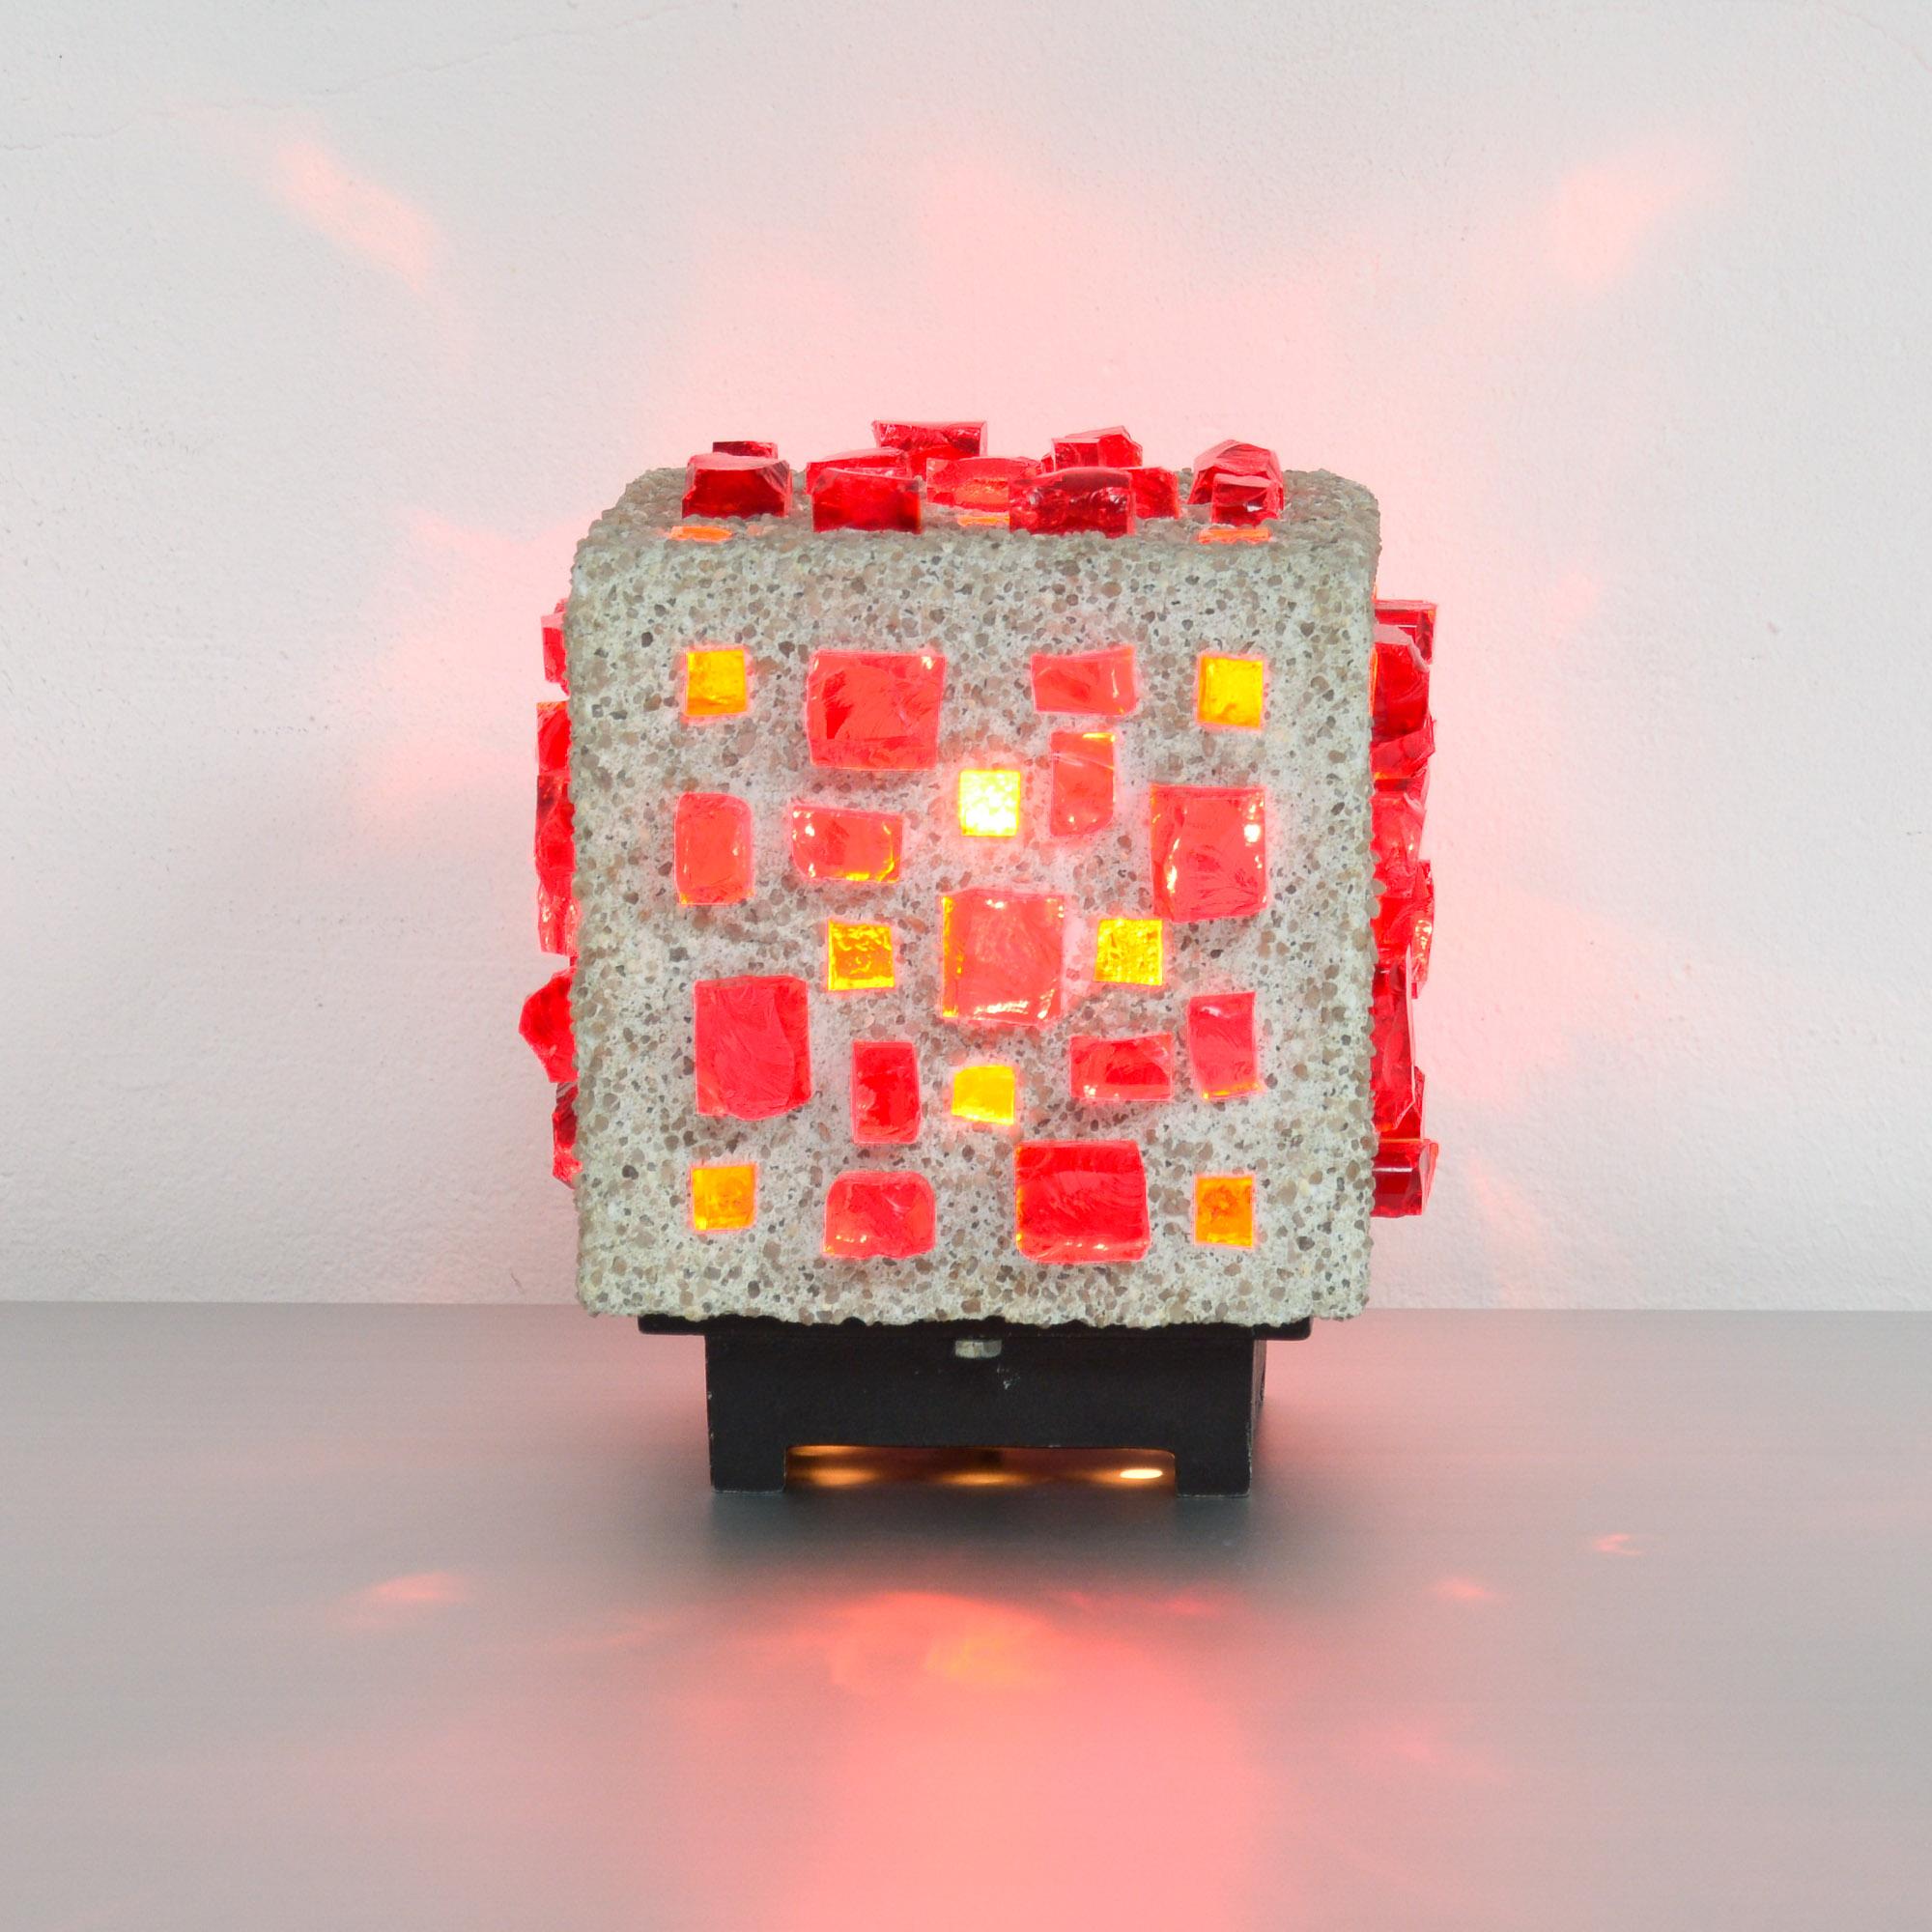 Belgian Brutalist Cube Table Lamp of the 1960s